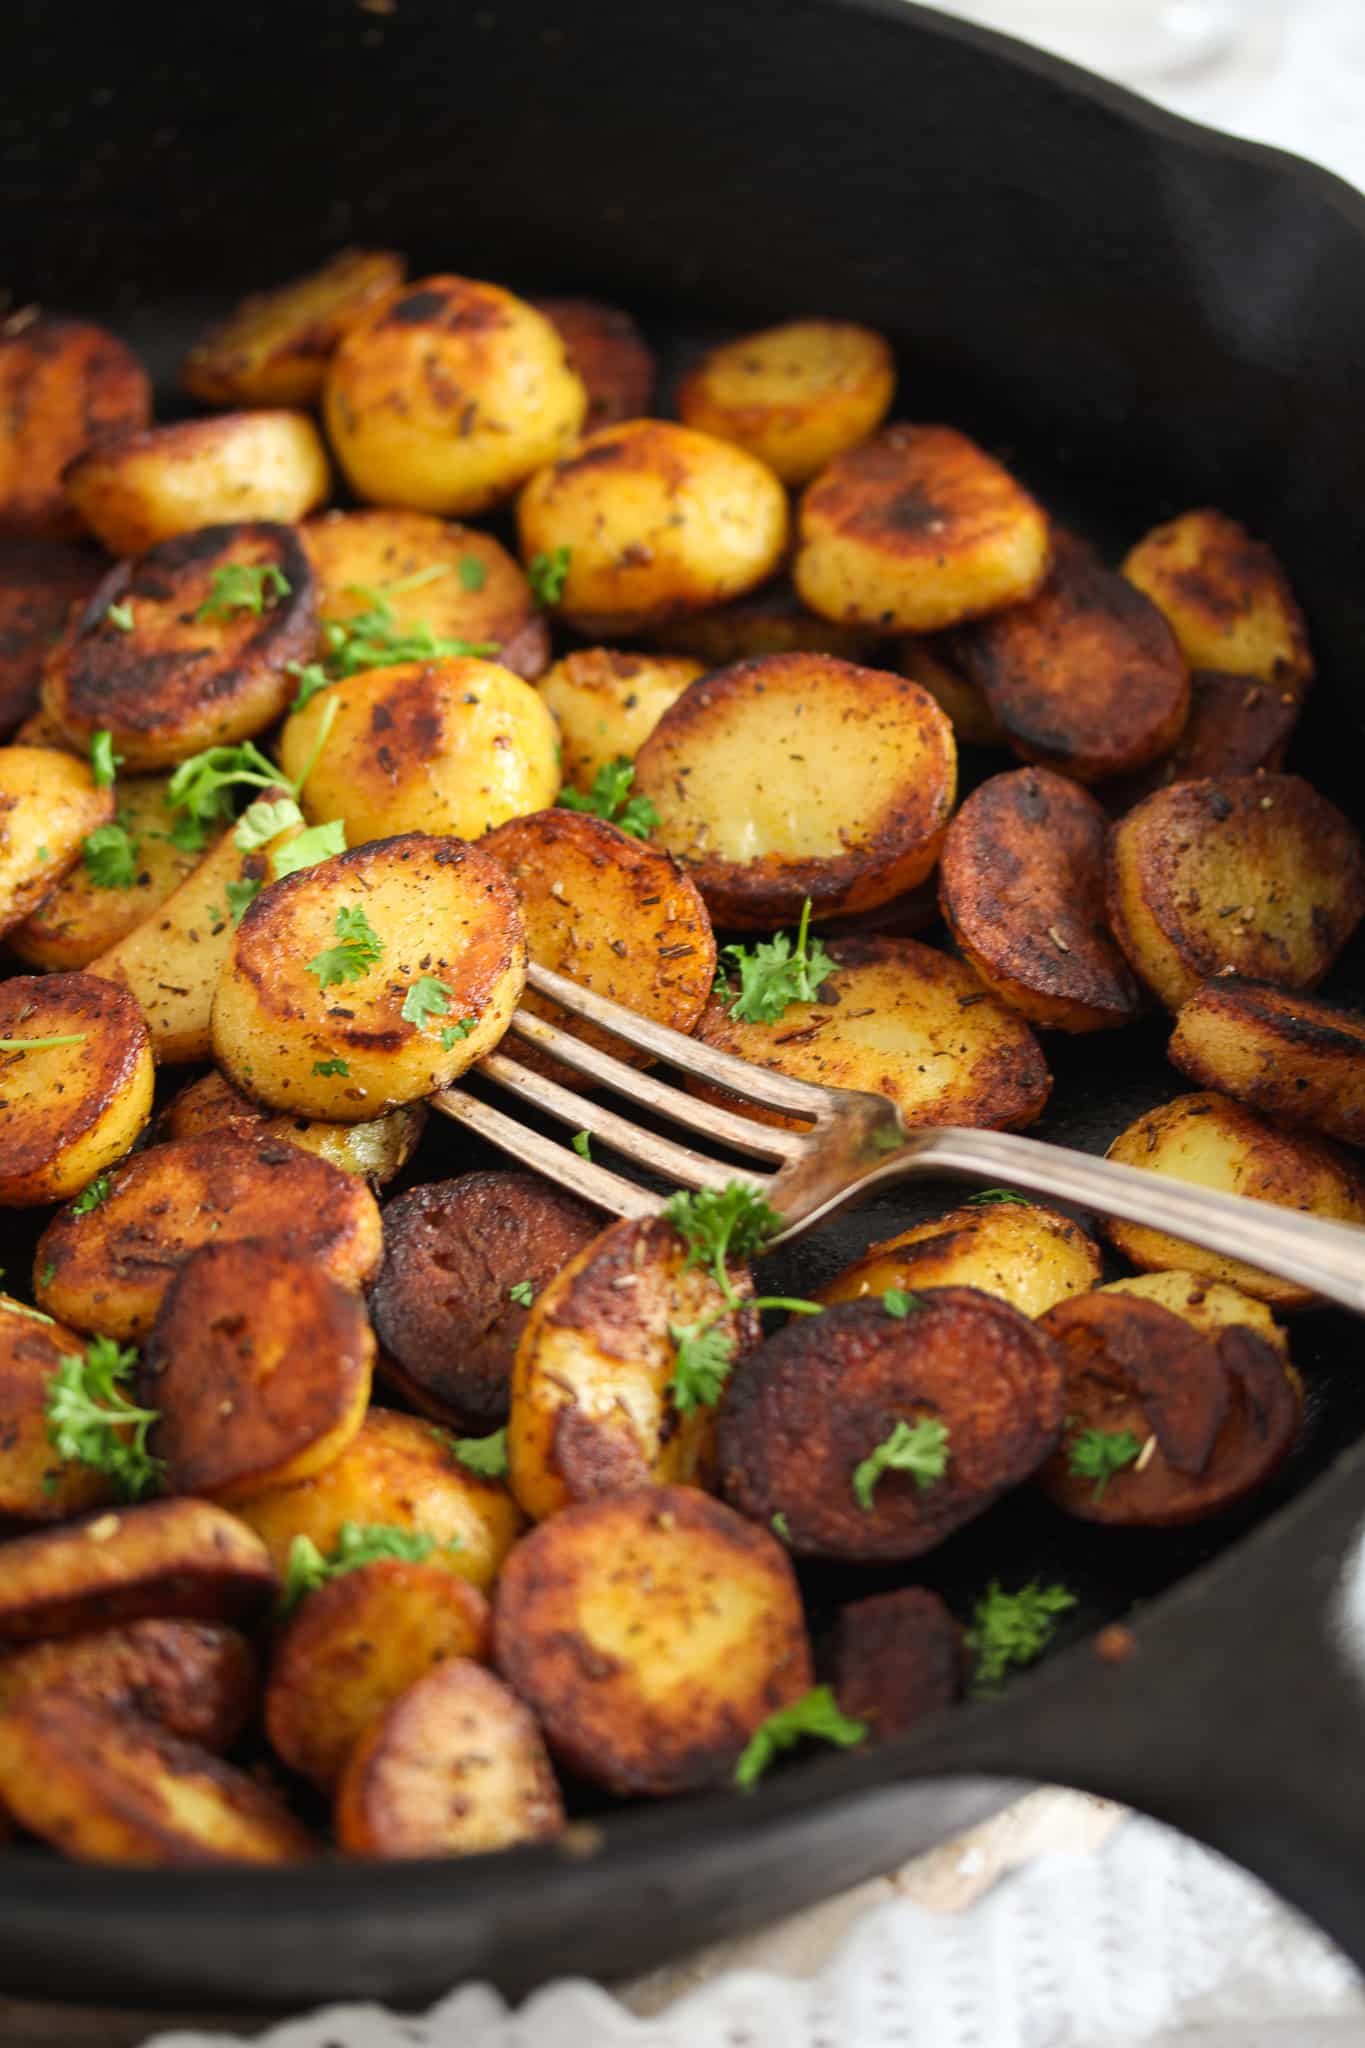 skillet fried potatoes sprinkled with parsley, with a vintage fork.